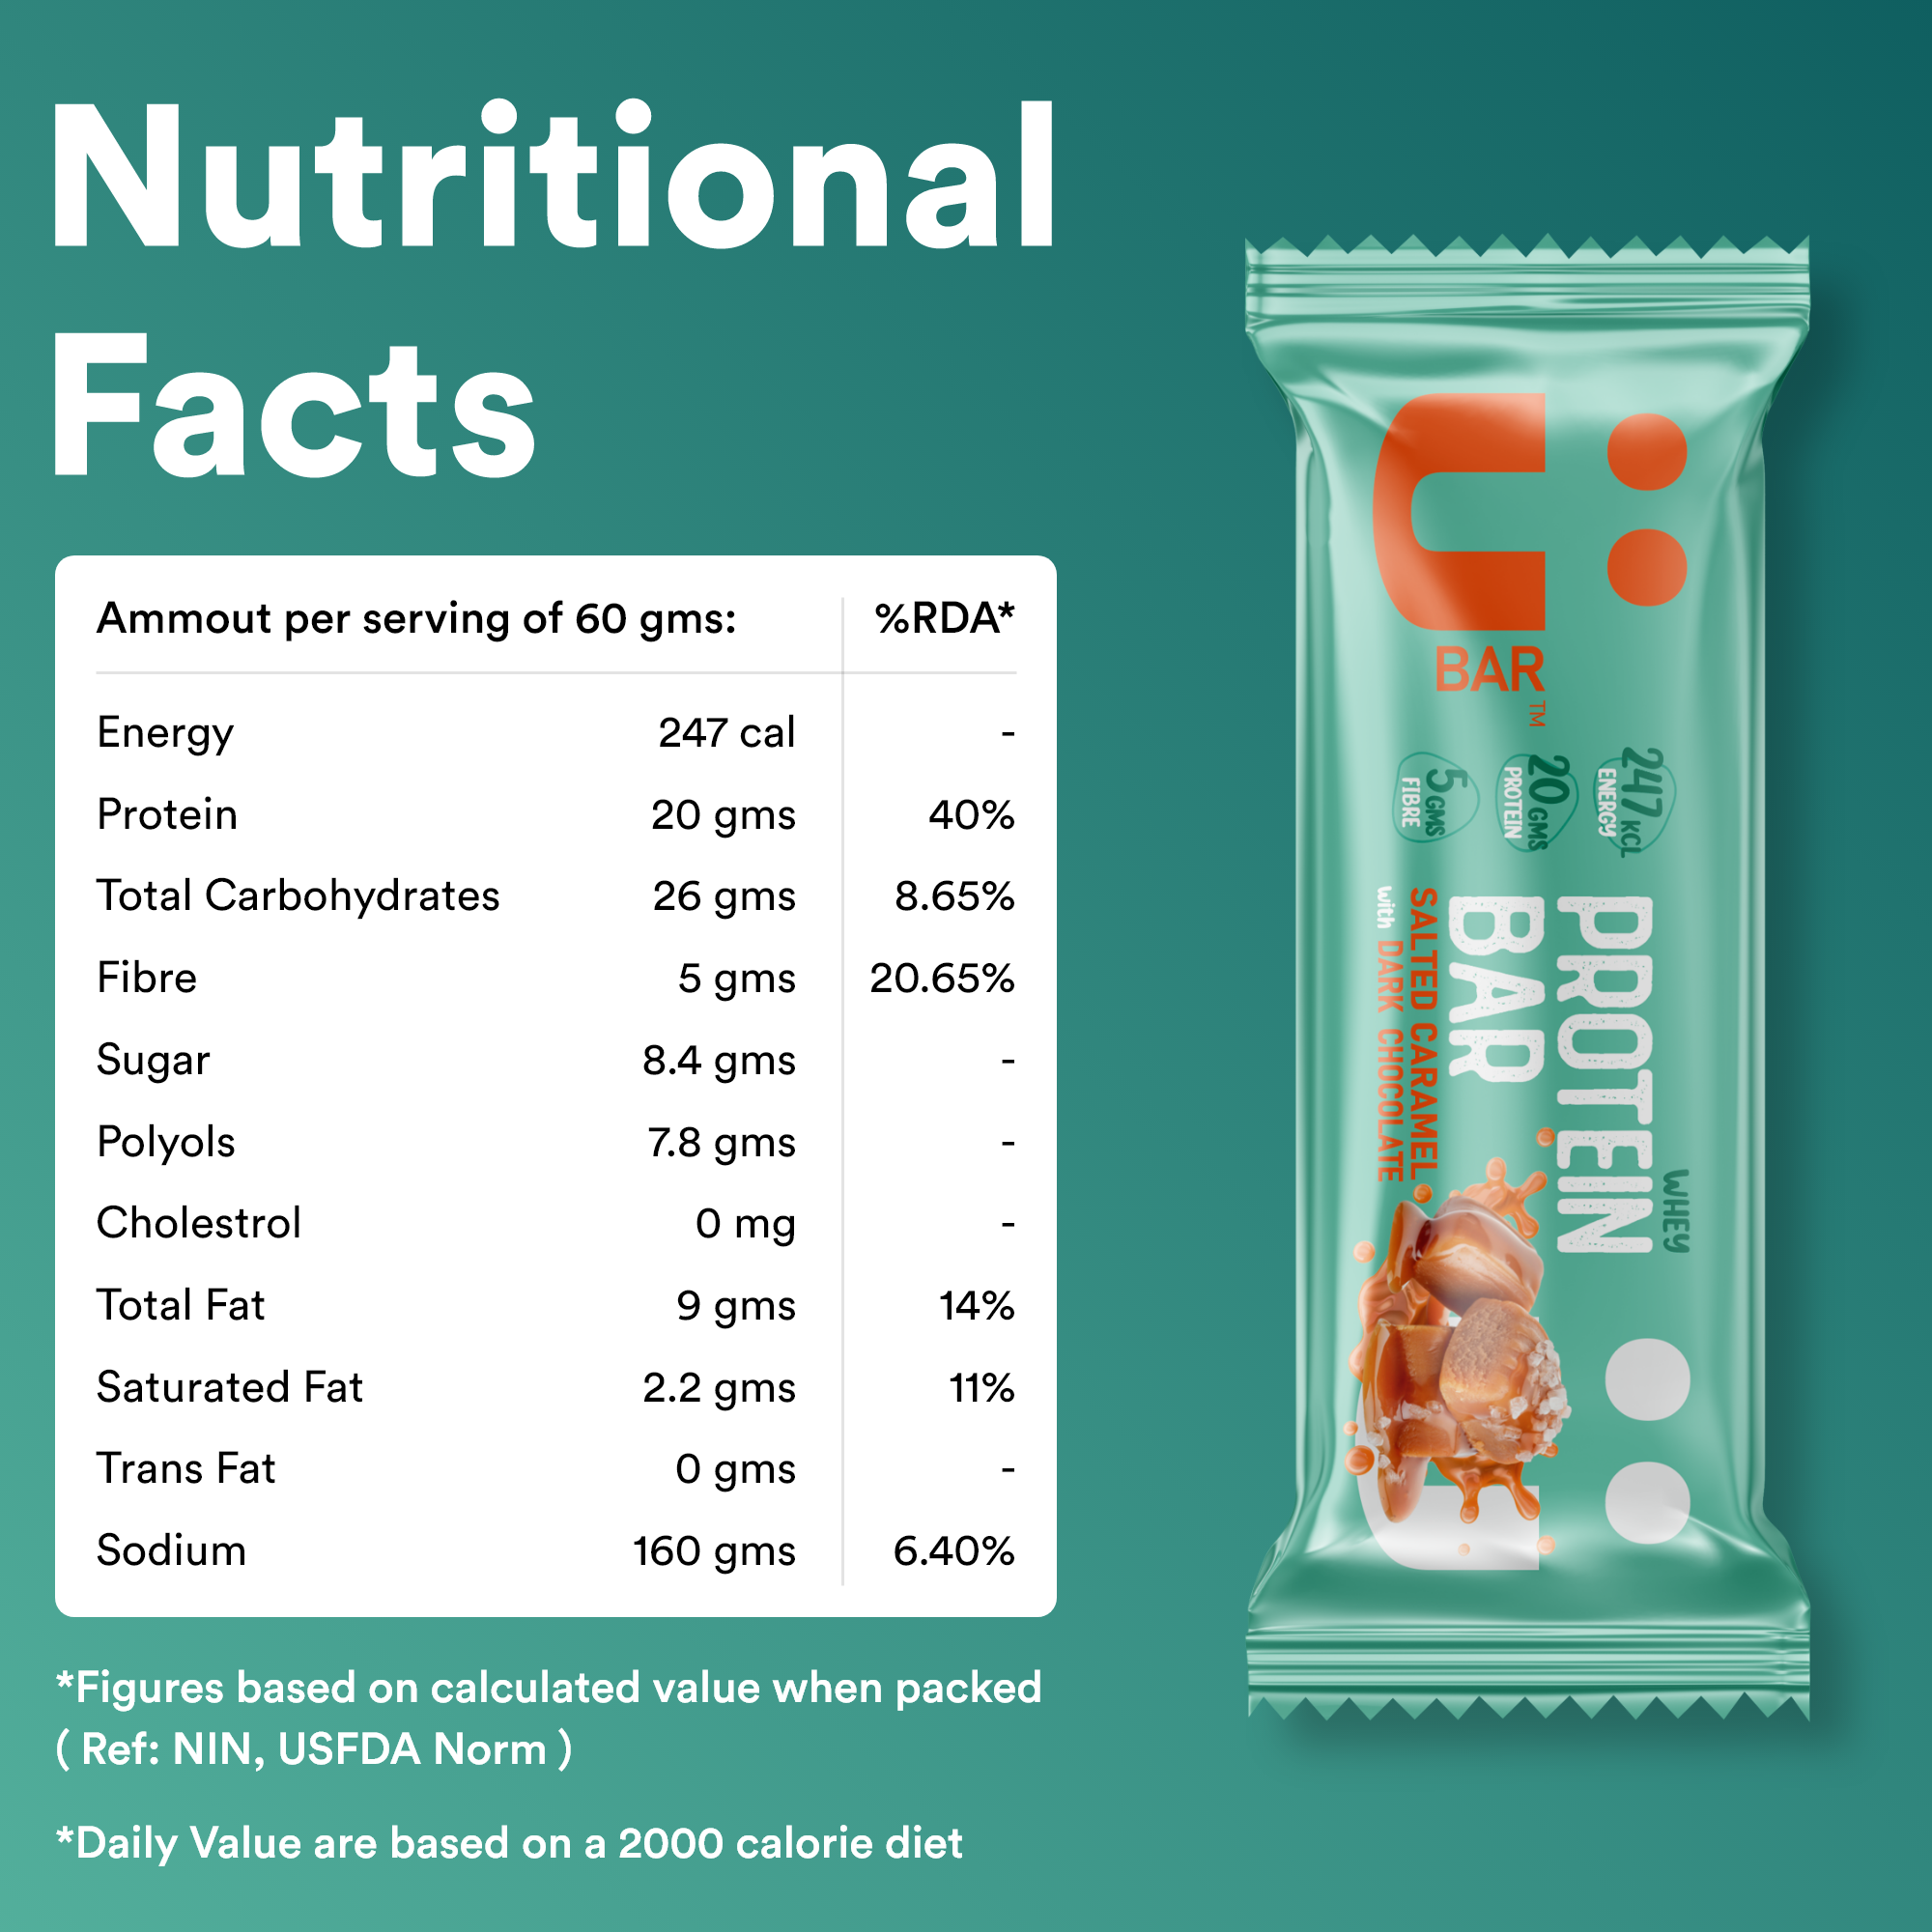 Salted Caramel With Dark Chocolate - Ubar - 20 Grams Protein in each 60 Grams Bar (Pack of 6, 360gm)